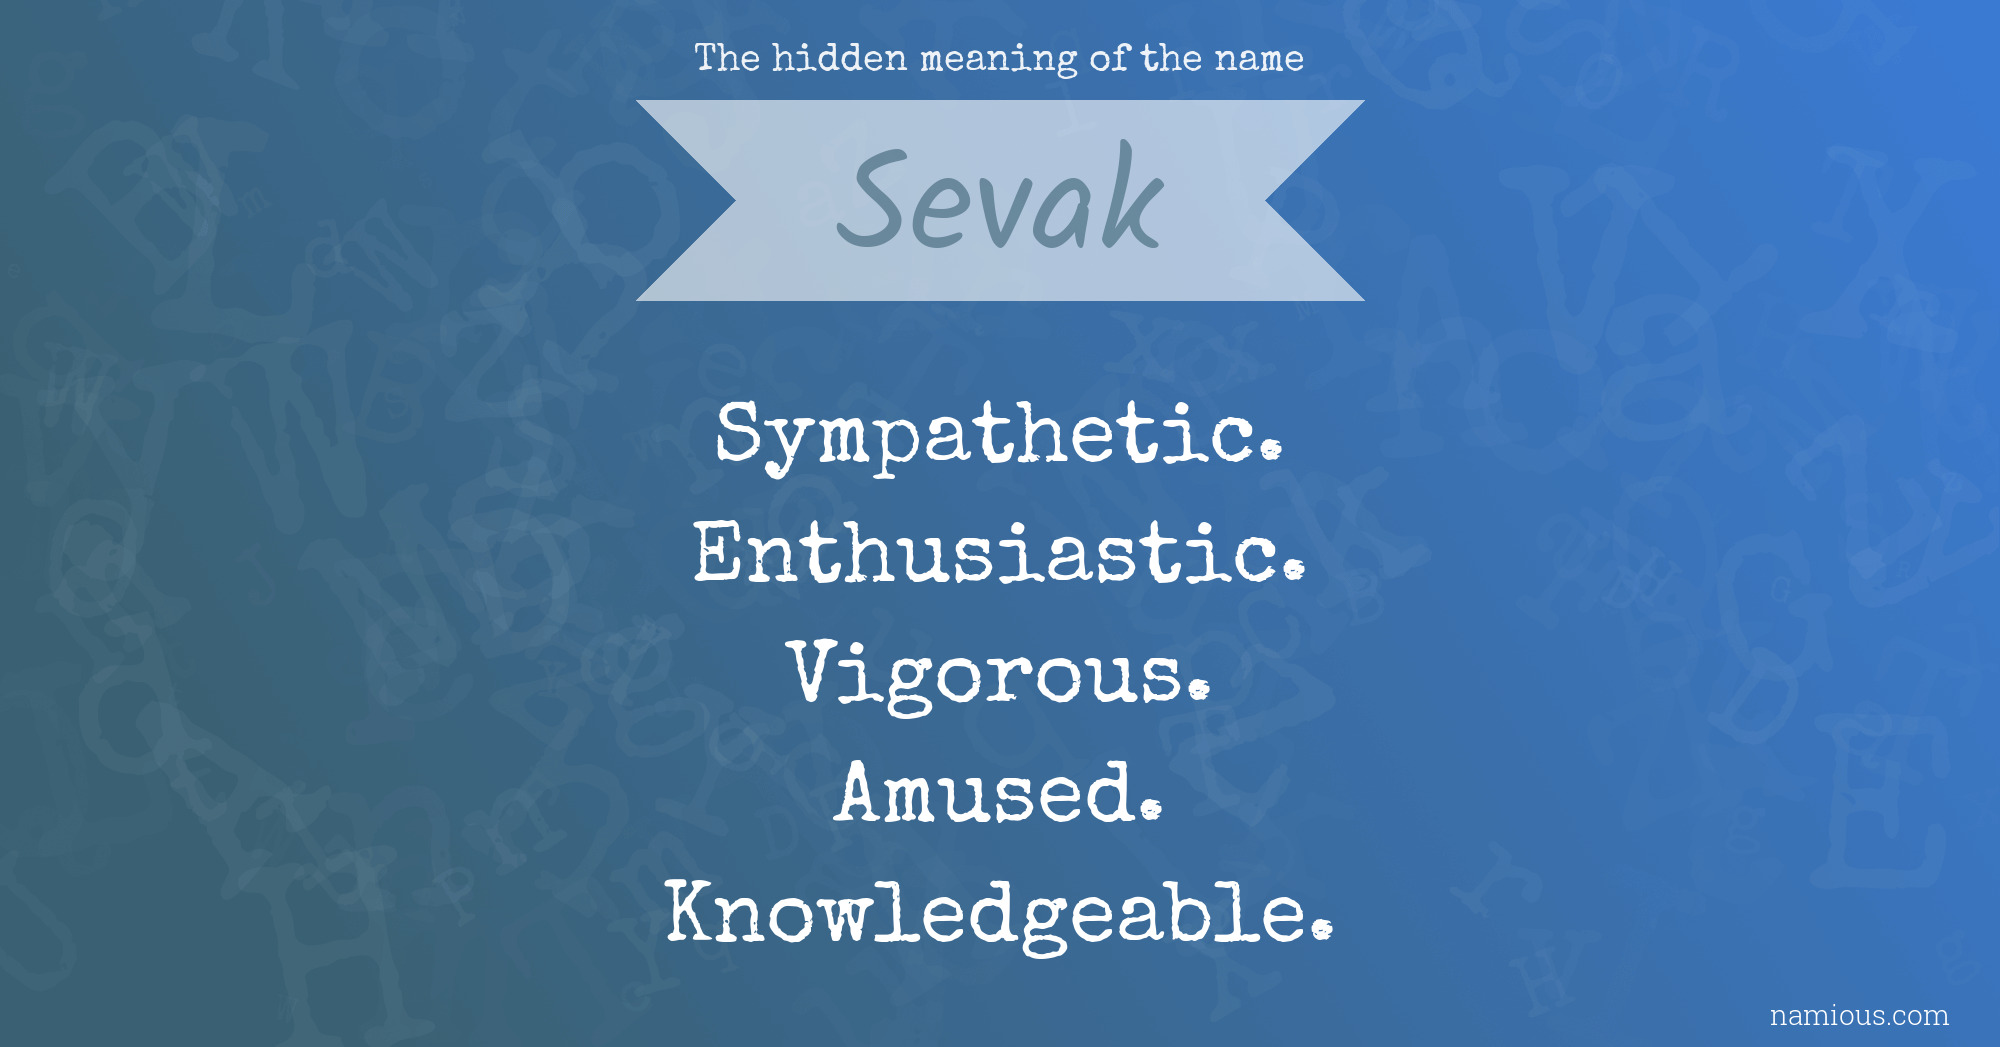 The hidden meaning of the name Sevak